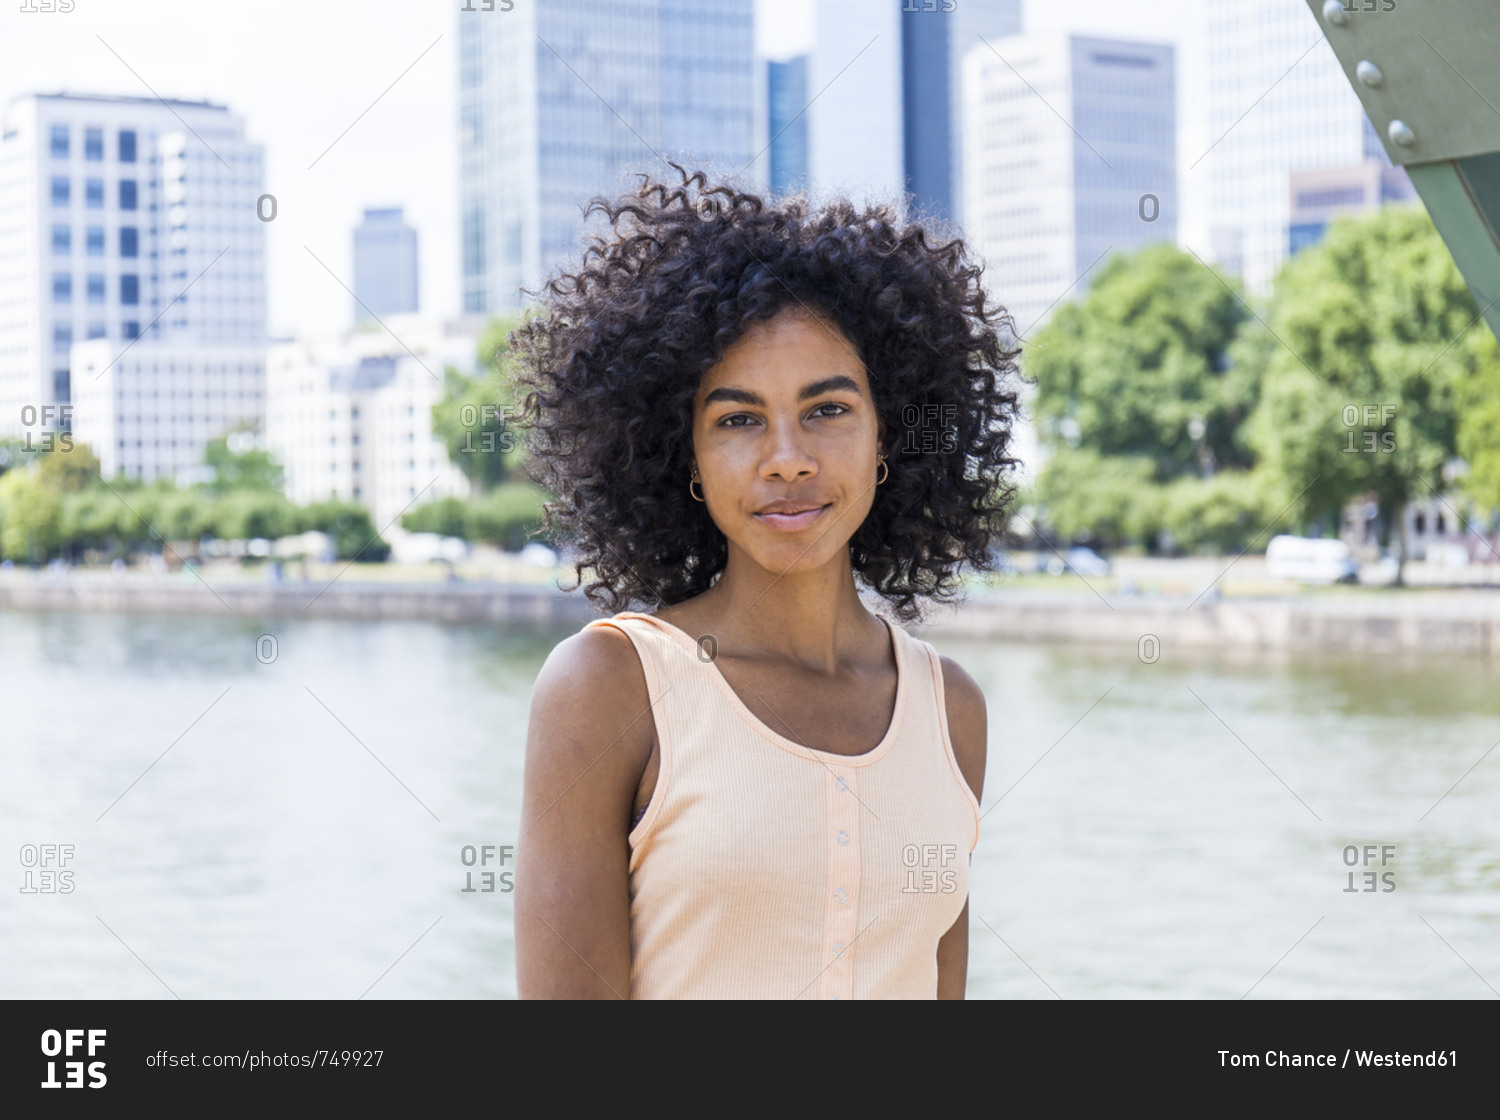 Germany, Frankfurt, portrait of relaxed young woman with curly hair in front of Main River